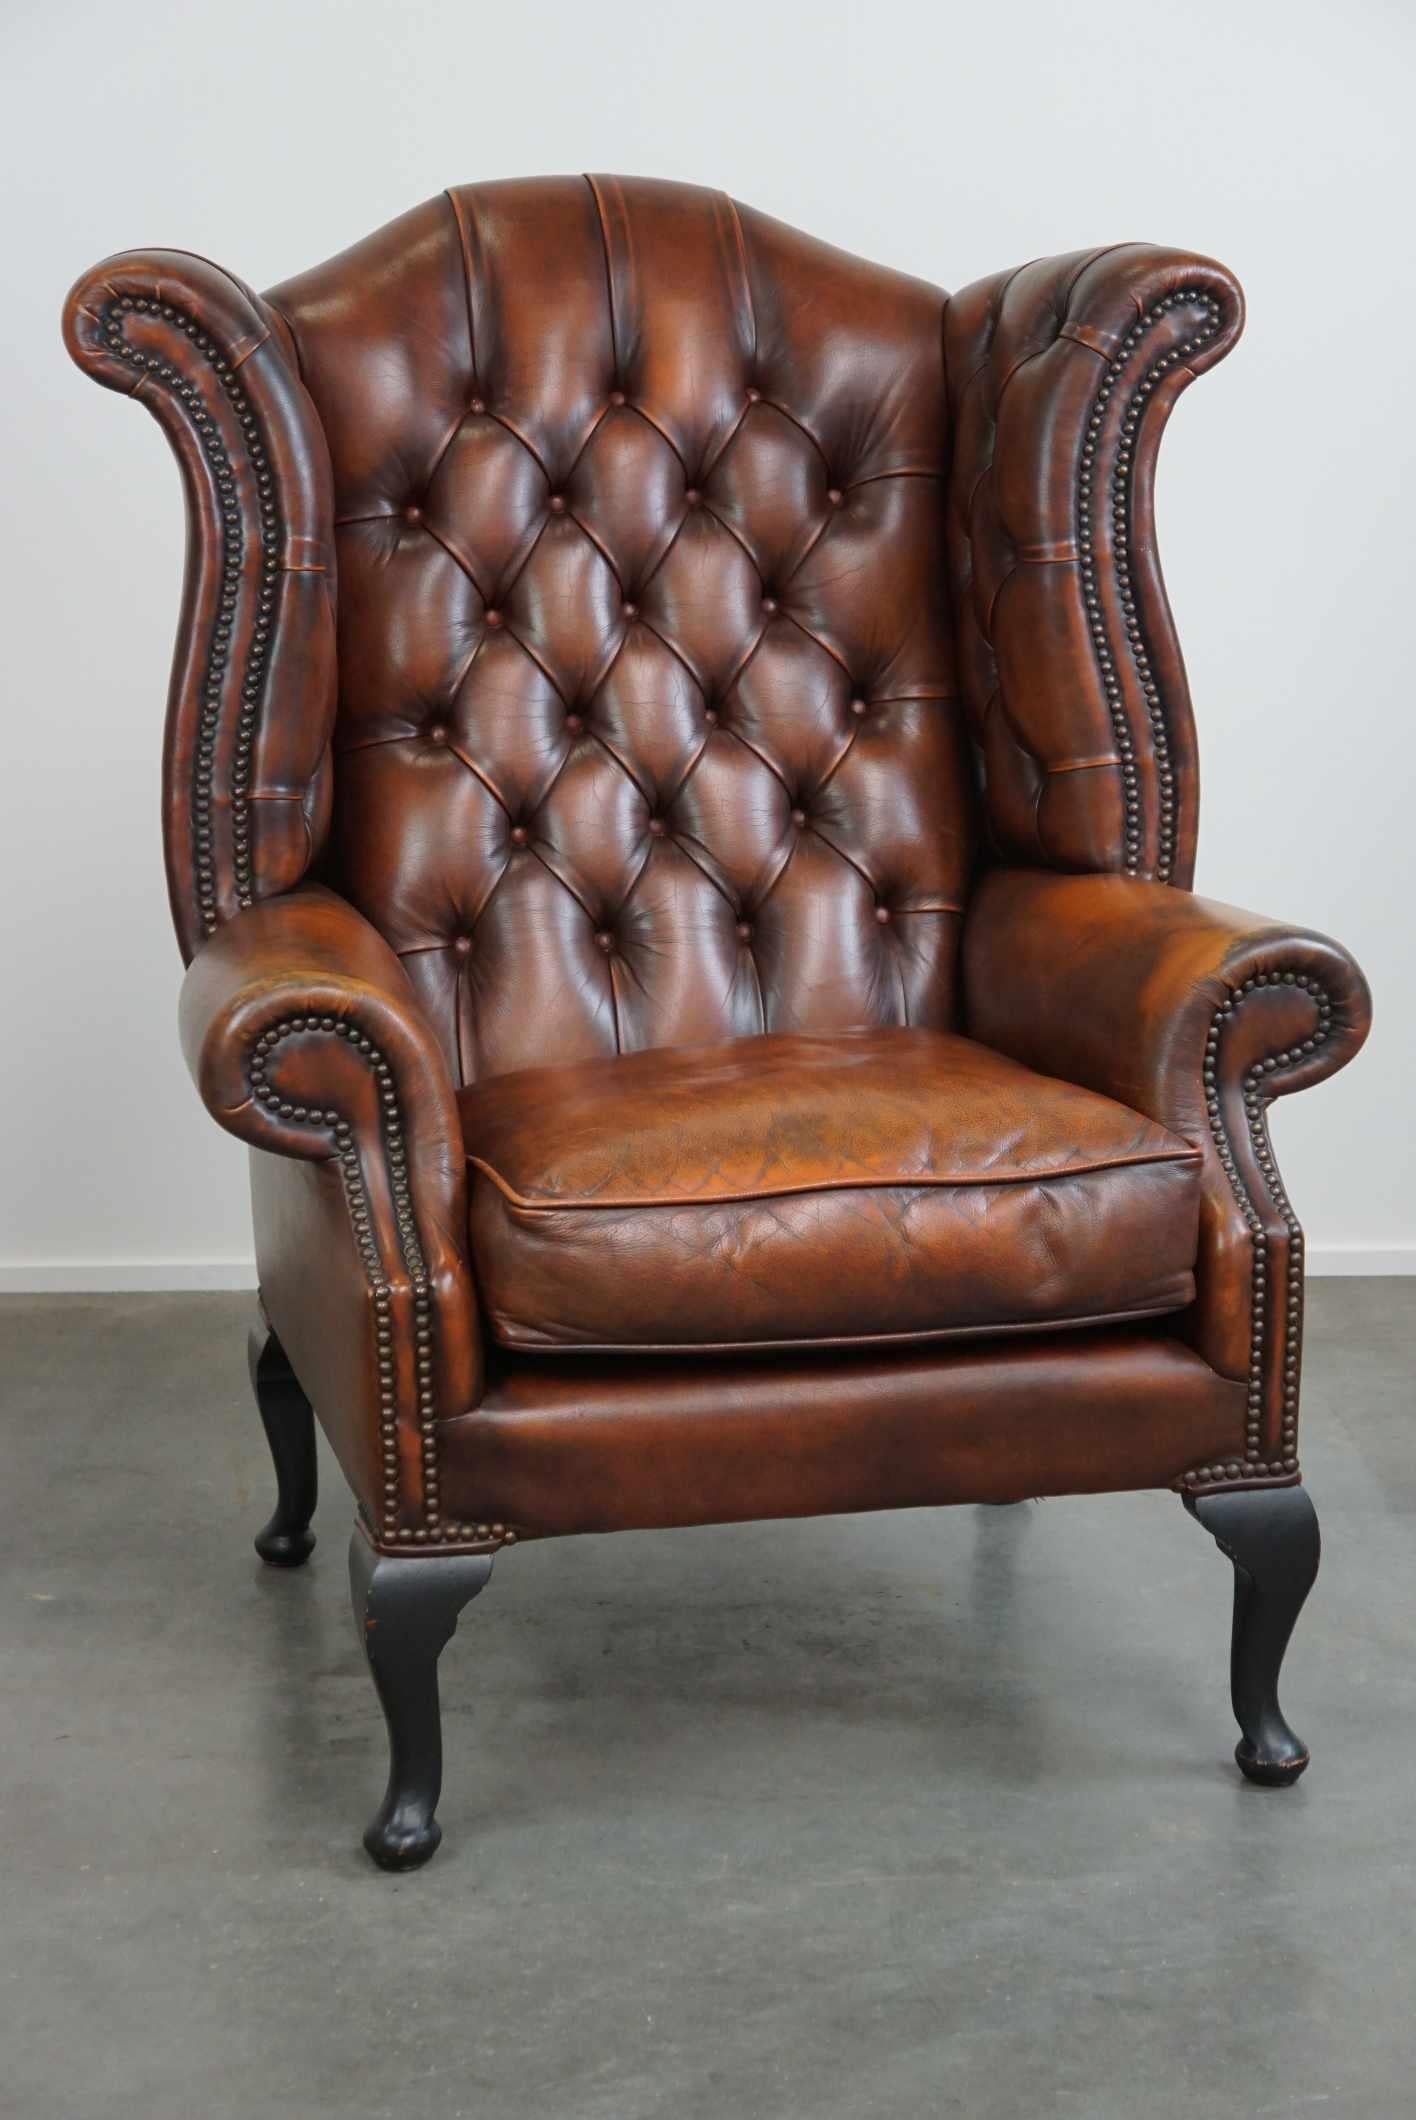 Offered: this comfortable and timeless cognac-colored English cowhide Chesterfield wingback armchair in good condition.

This beautiful cowhide wingback armchair is in good condition and provides comfortable seating. It features a detachable seat